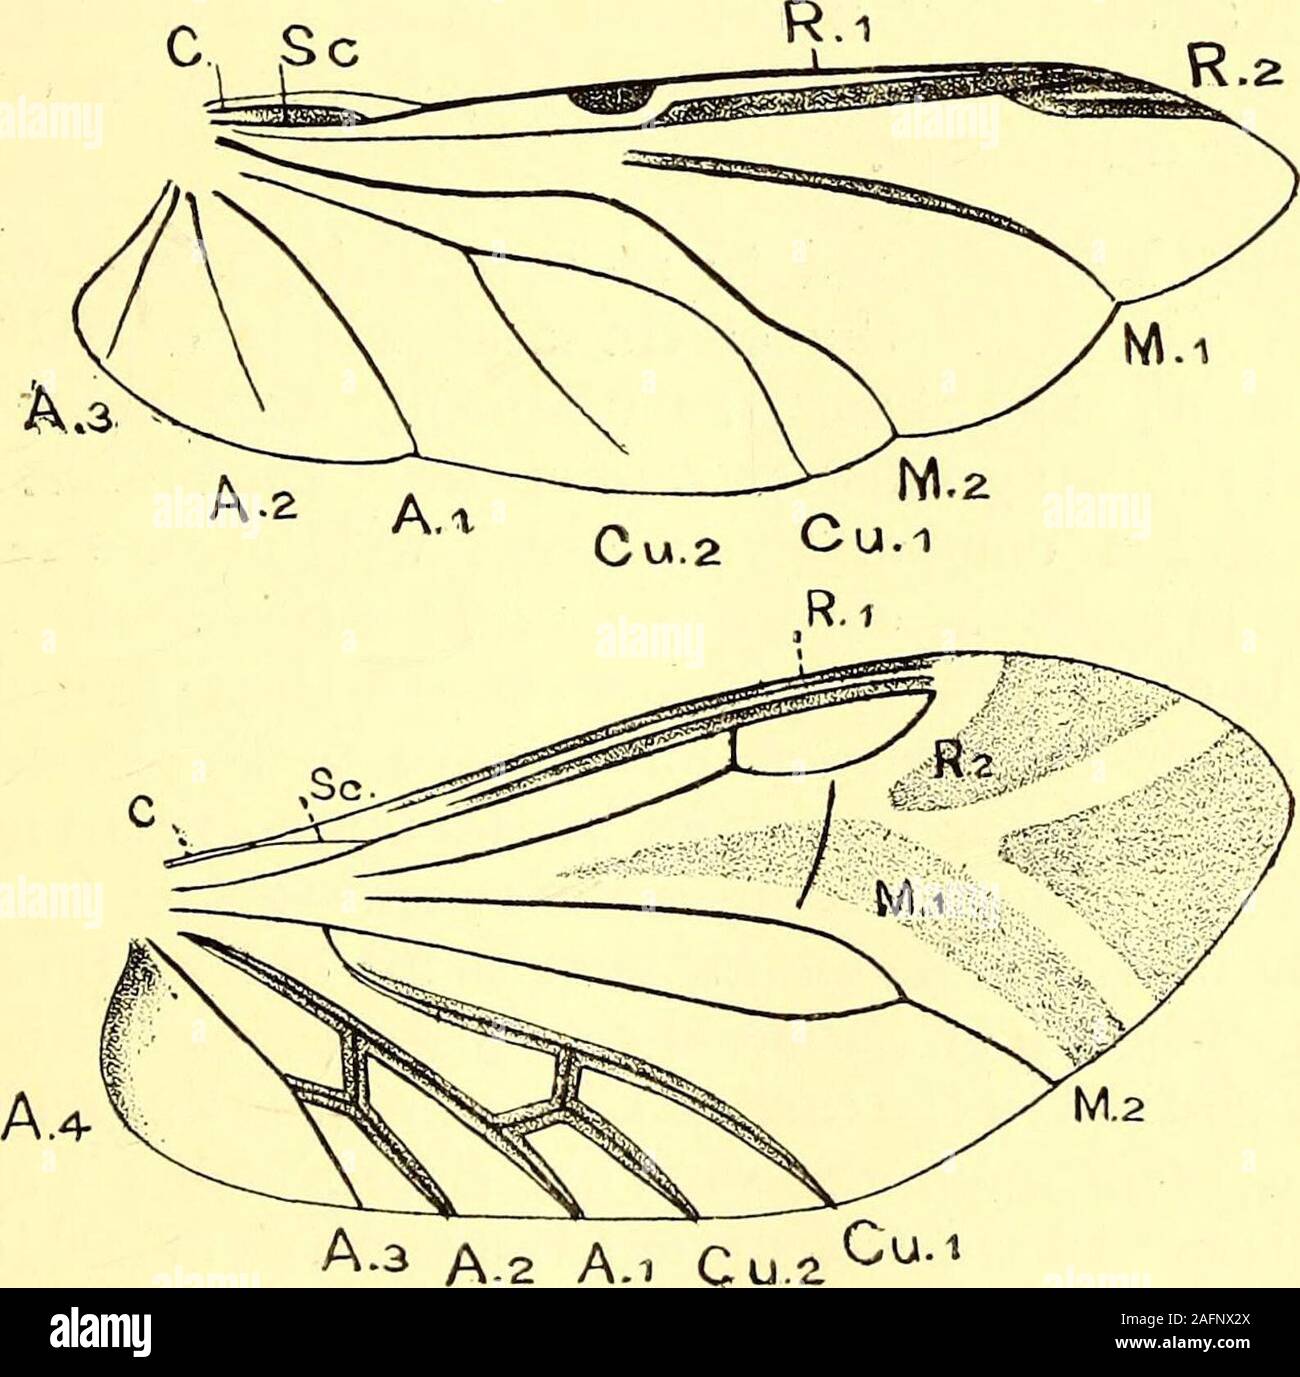 . Coleoptera : general introduction and Cicindelidae and Paussidae. A.I Cu 2Pu.i M.2 Fig. 19.—Adephagid type of wing. Upper figure : Omma stanleyi. (After Kolbe.)Lower figure : Taehypus flavipes. (After Kempers.). Fig. 20. Upper figure : Staphylinid type of wing ; Necrophorus vespillodcs.Lower figure: Cantharid or Telephorid type of wing; Li/aisfopicrussanguineus. (After Kempers.) 42 INTRODUCTION. at the base to any other vein. This is a very distinct anduniform type, as far as it goes, but its adoption seems tohave the effect of keeping apart several genera that on othercharacters appear to b Stock Photo